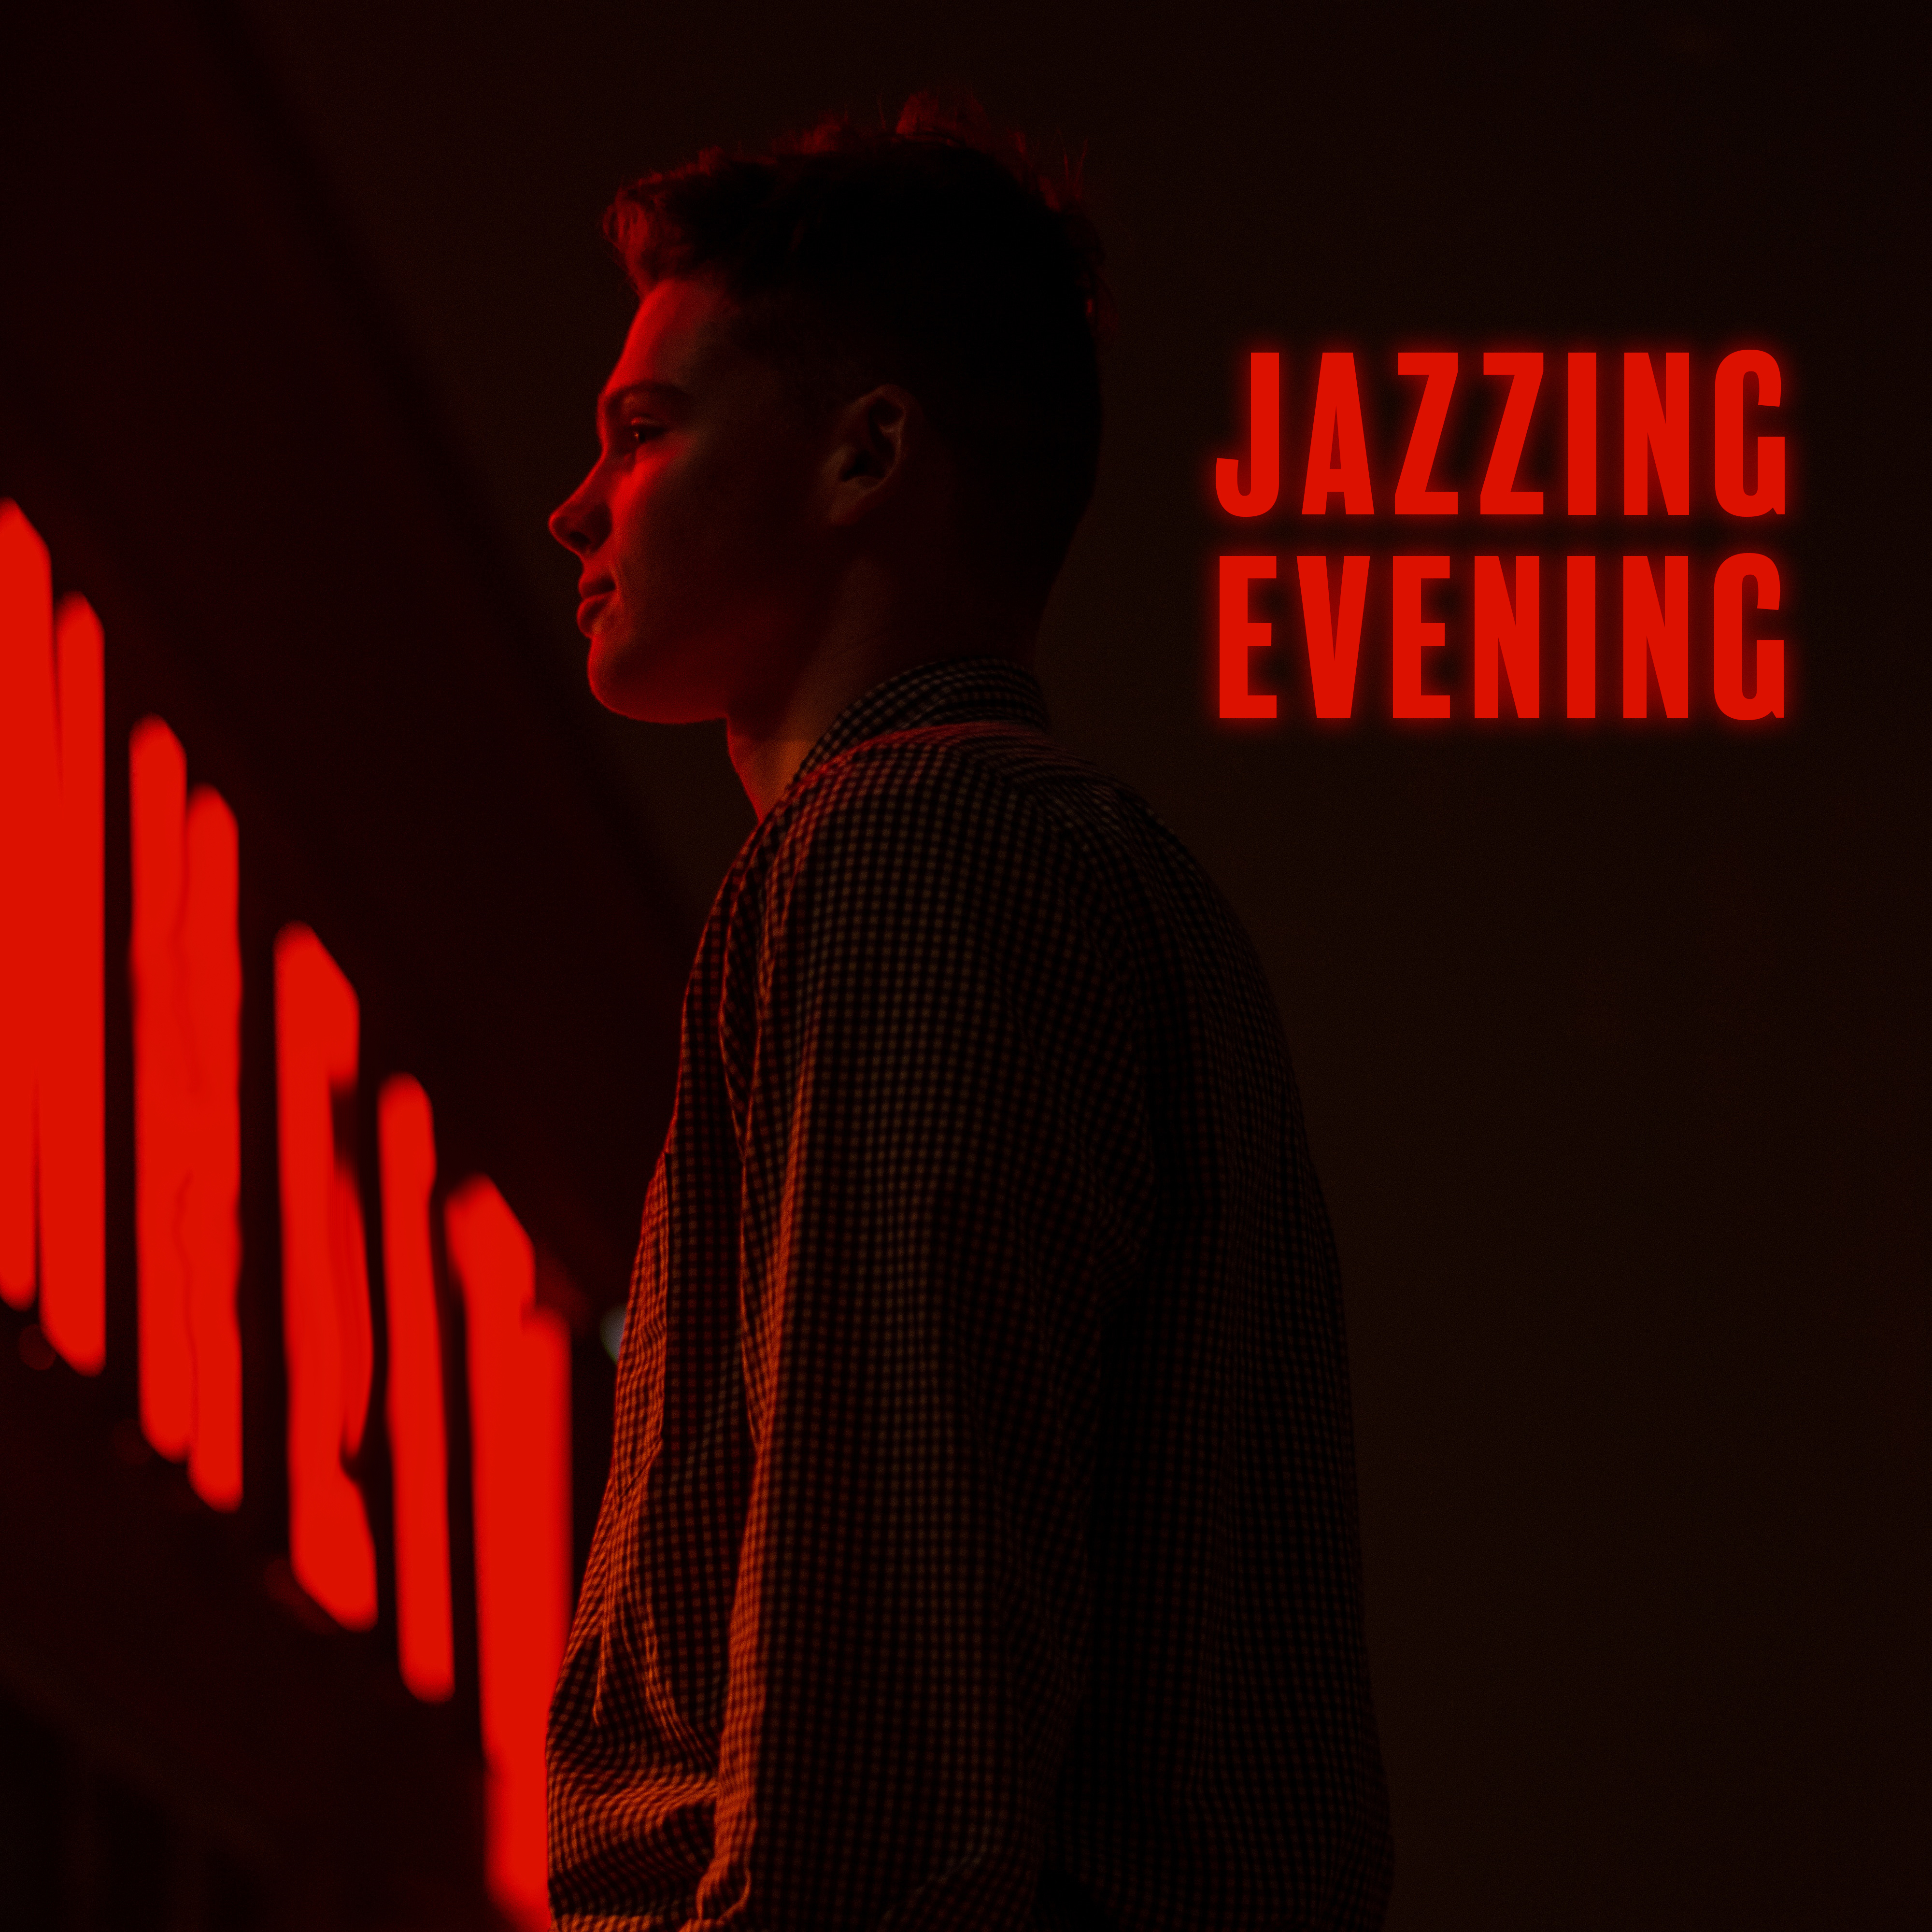 Jazzing Evening: Music for Listening, Relaxation or Slow Dancing